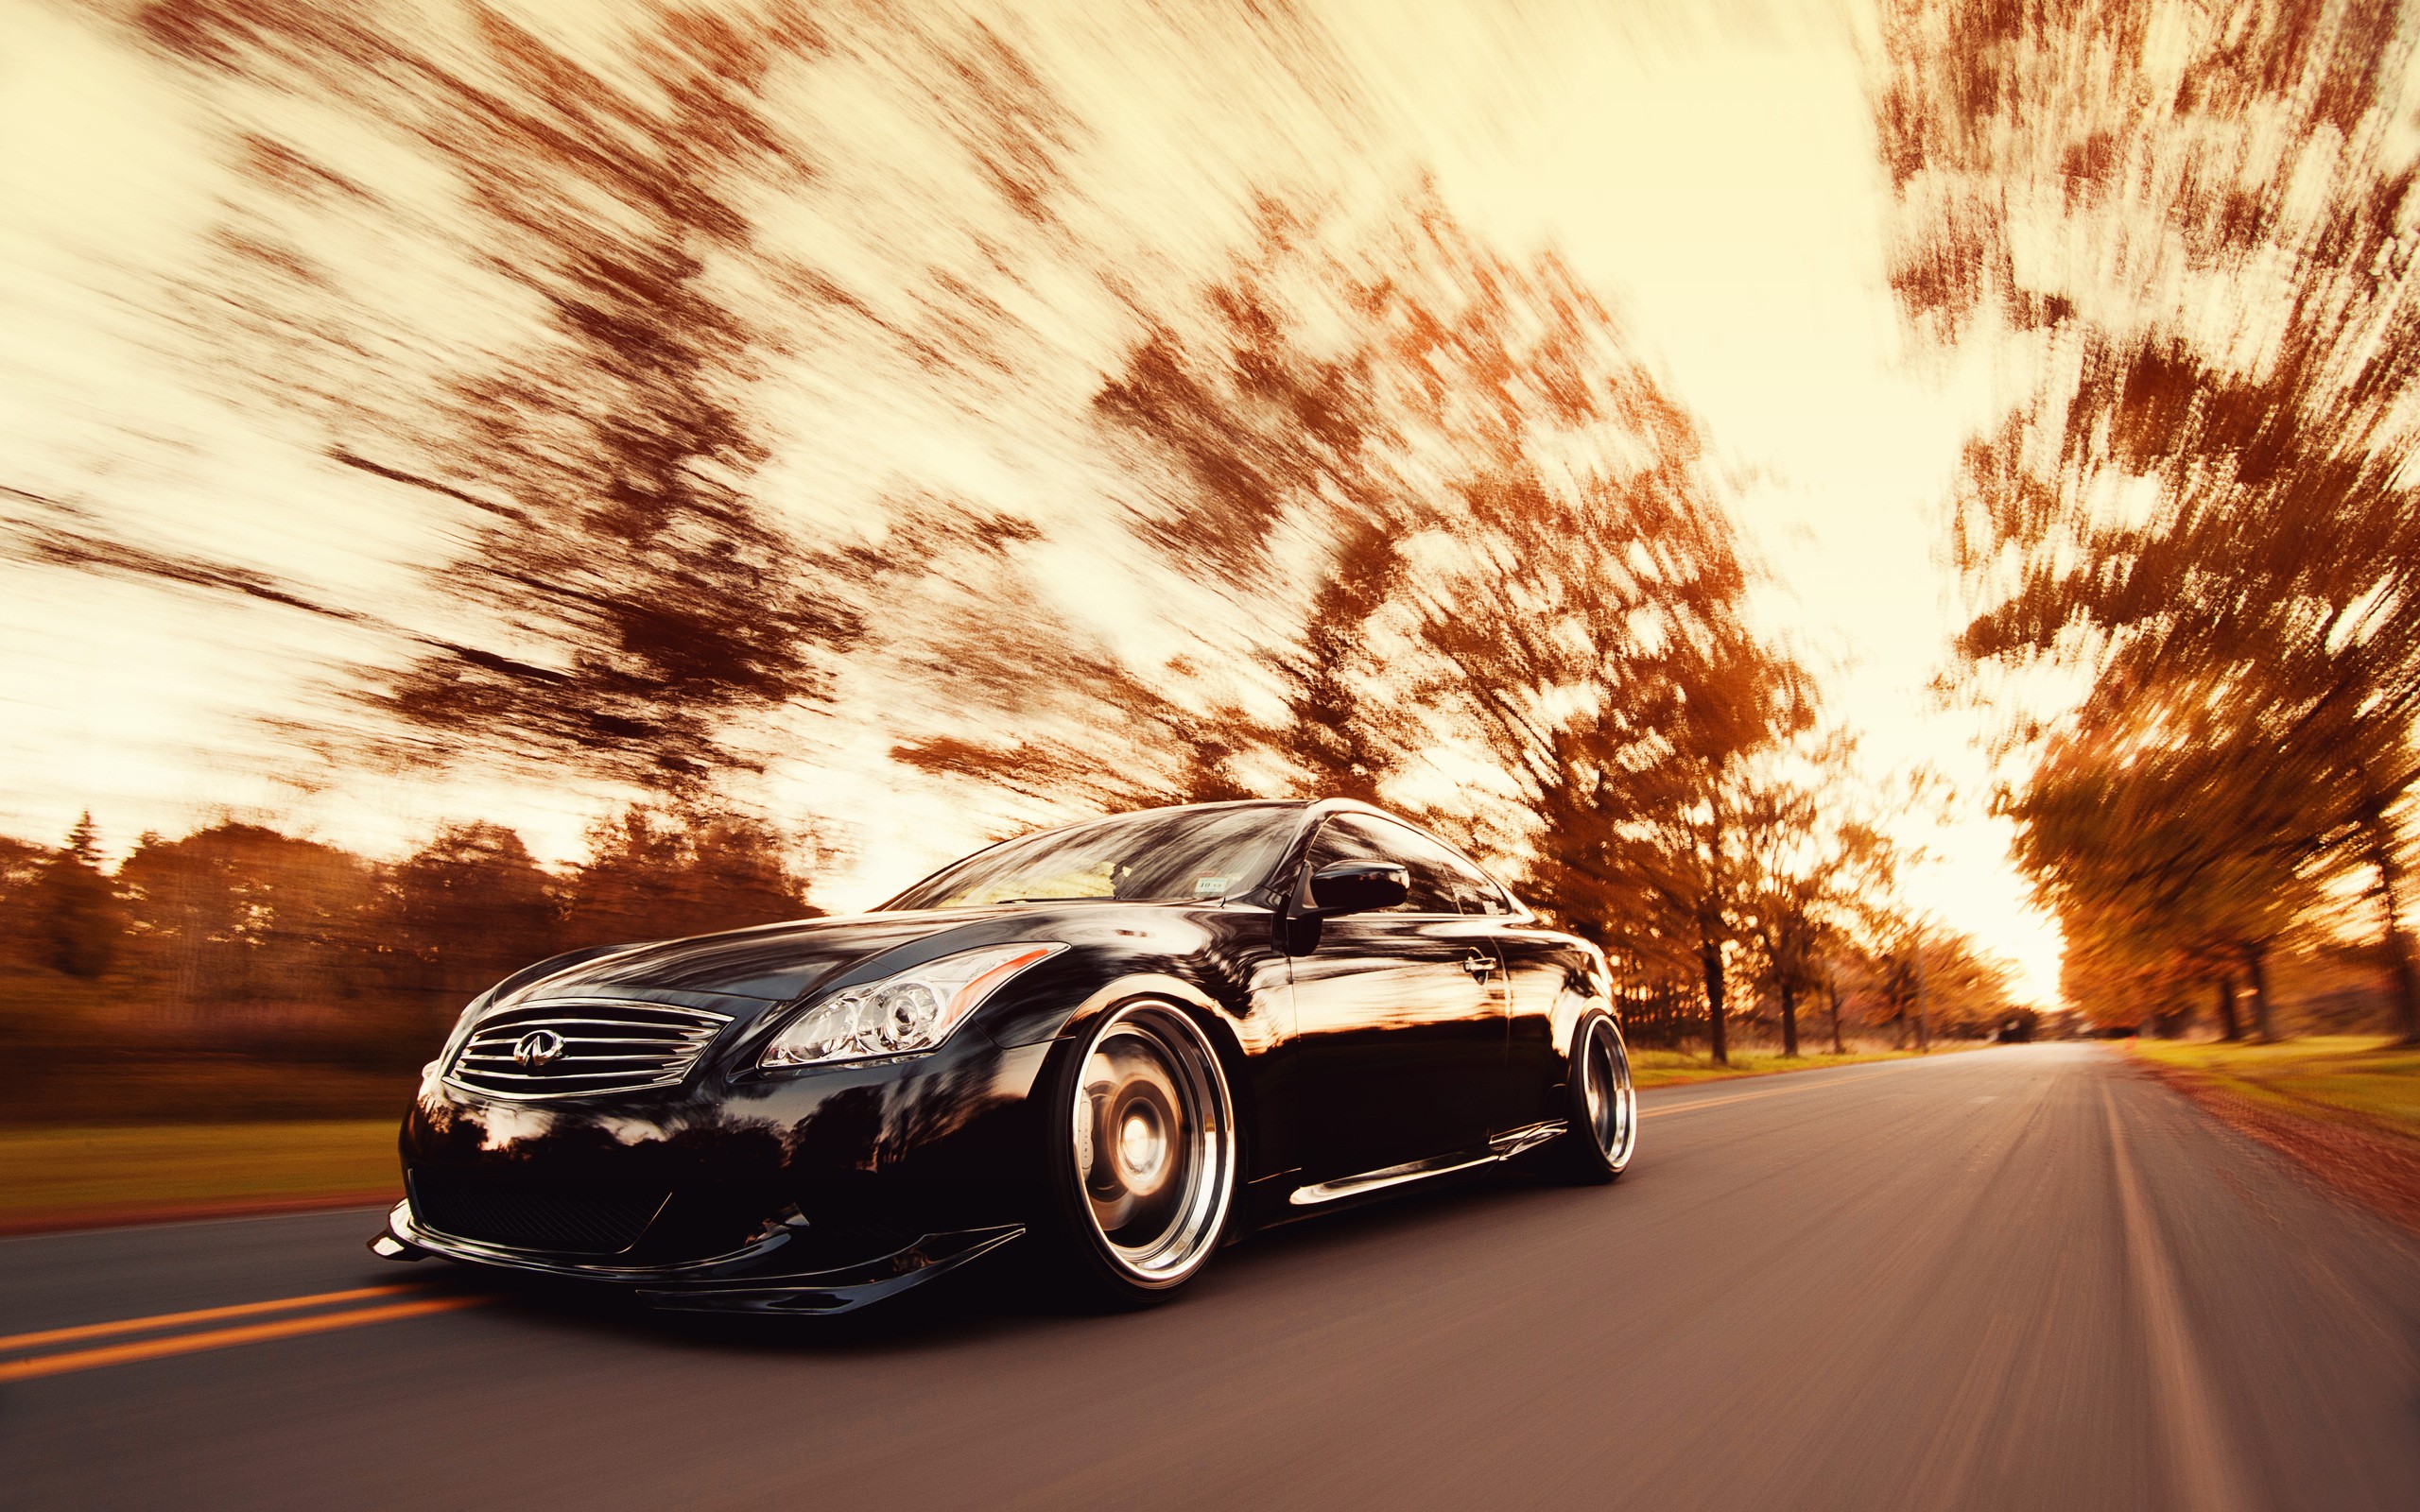 Download the G37 Stance Wallpaper, G37 Stance iPhone Wallpaper, G37